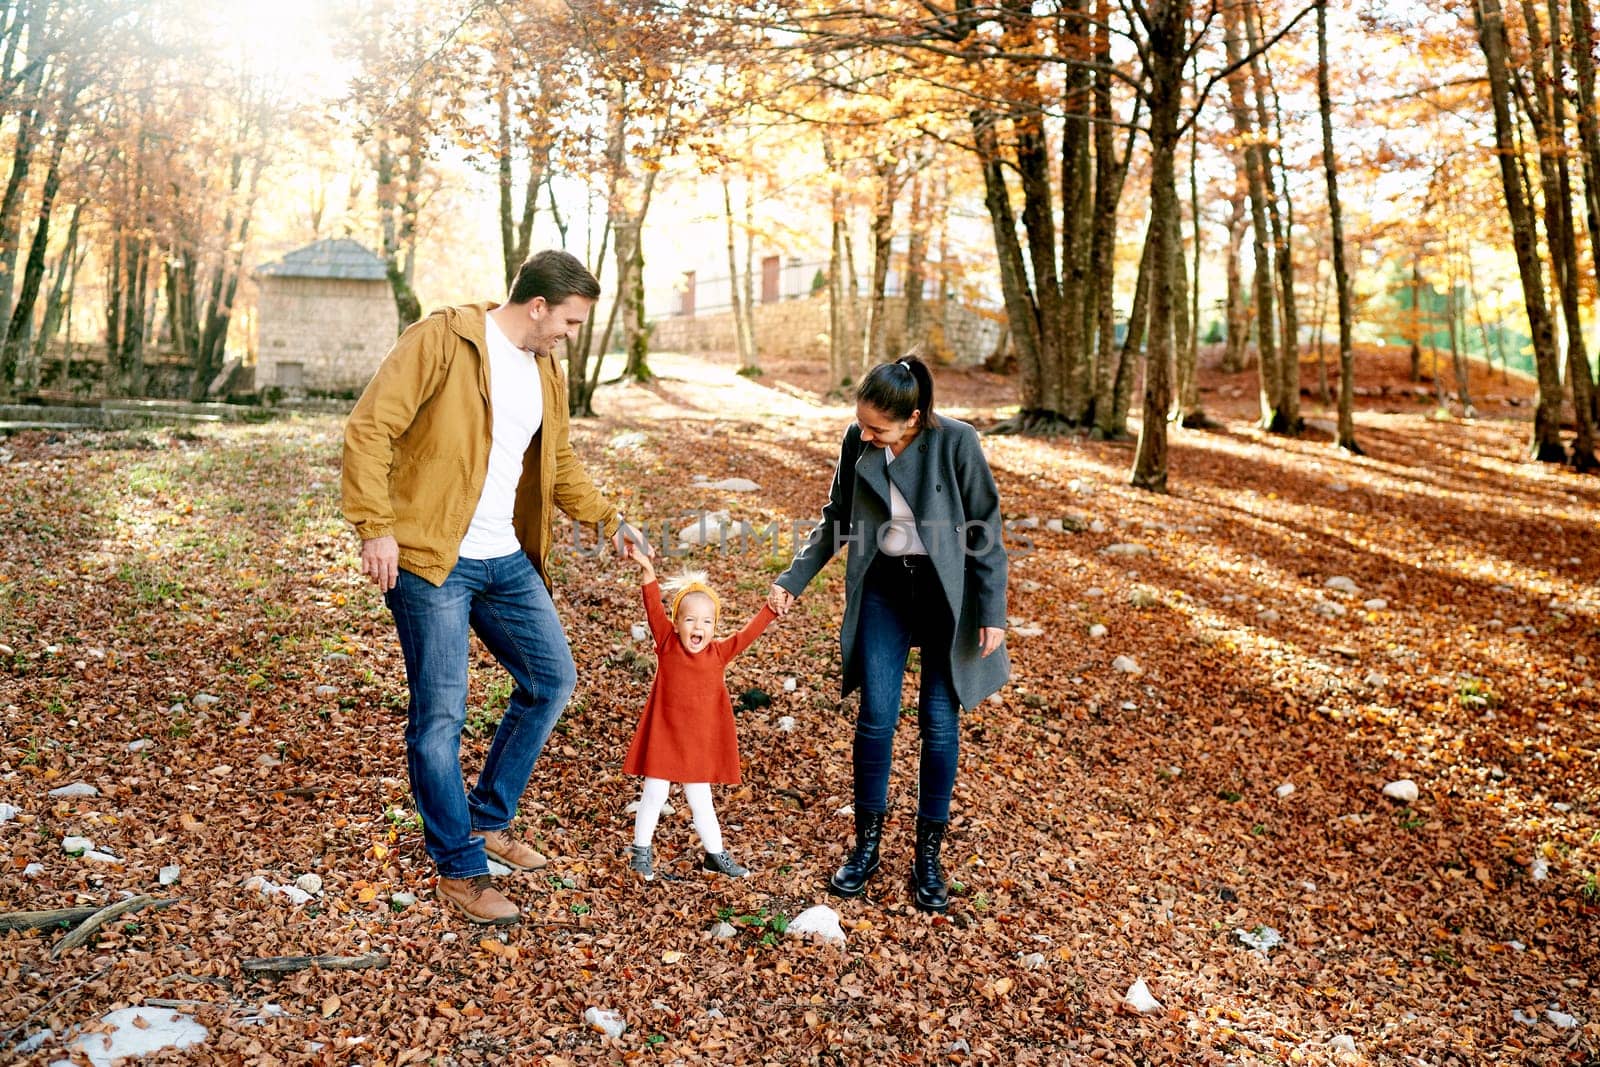 Little laughing girl stands on fallen leaves in the forest, holding hands with mom and dad by Nadtochiy